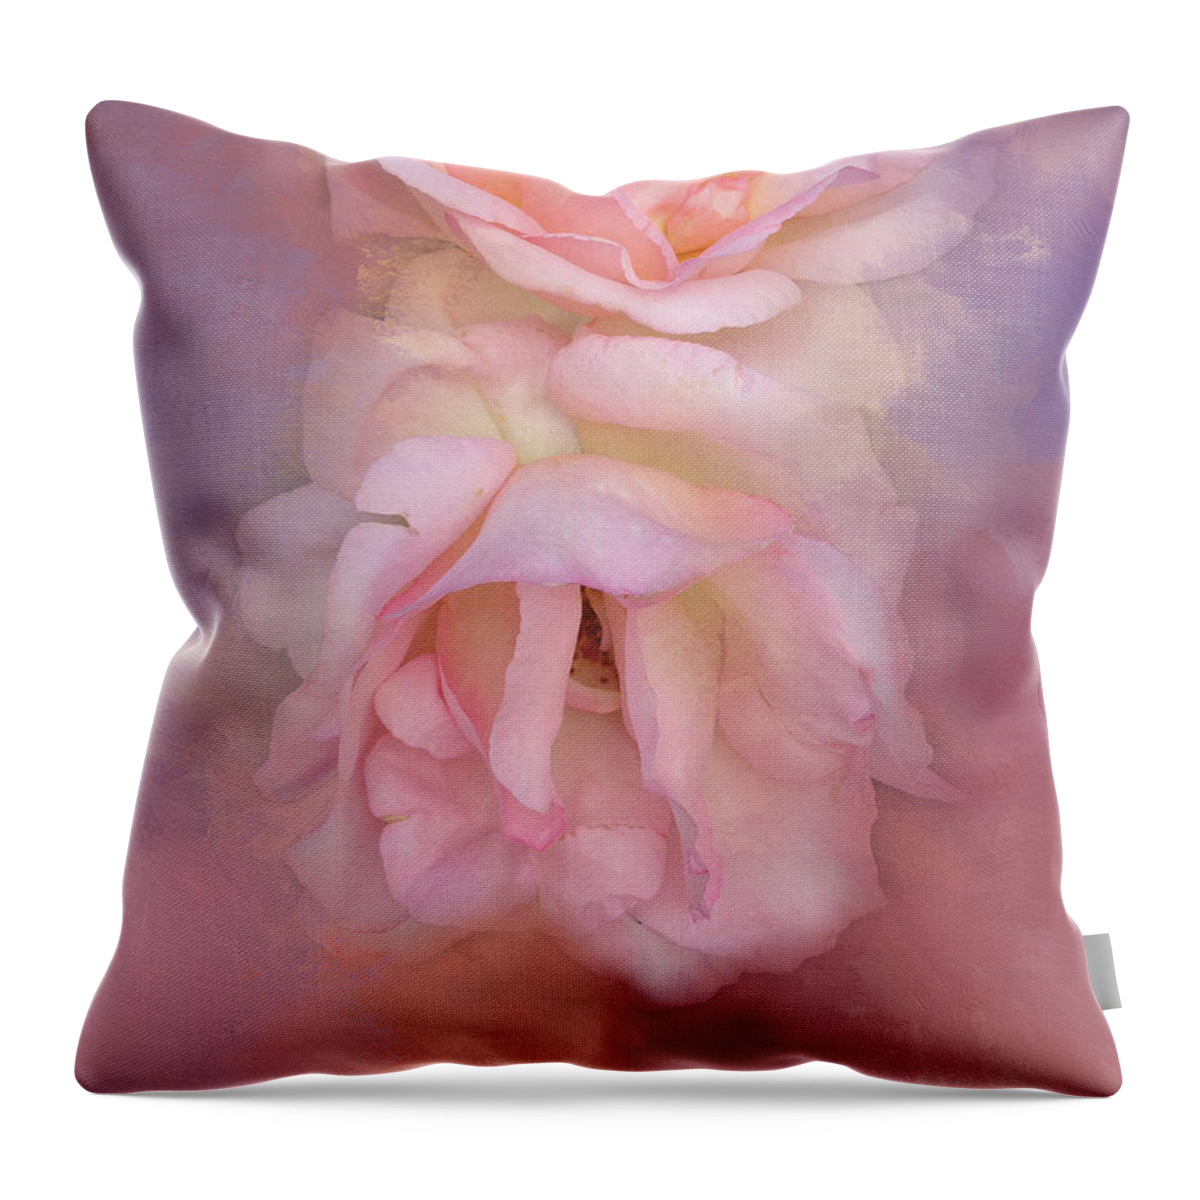 Floral Throw Pillow featuring the photograph Painted Pink Rose Dream by Theresa Tahara